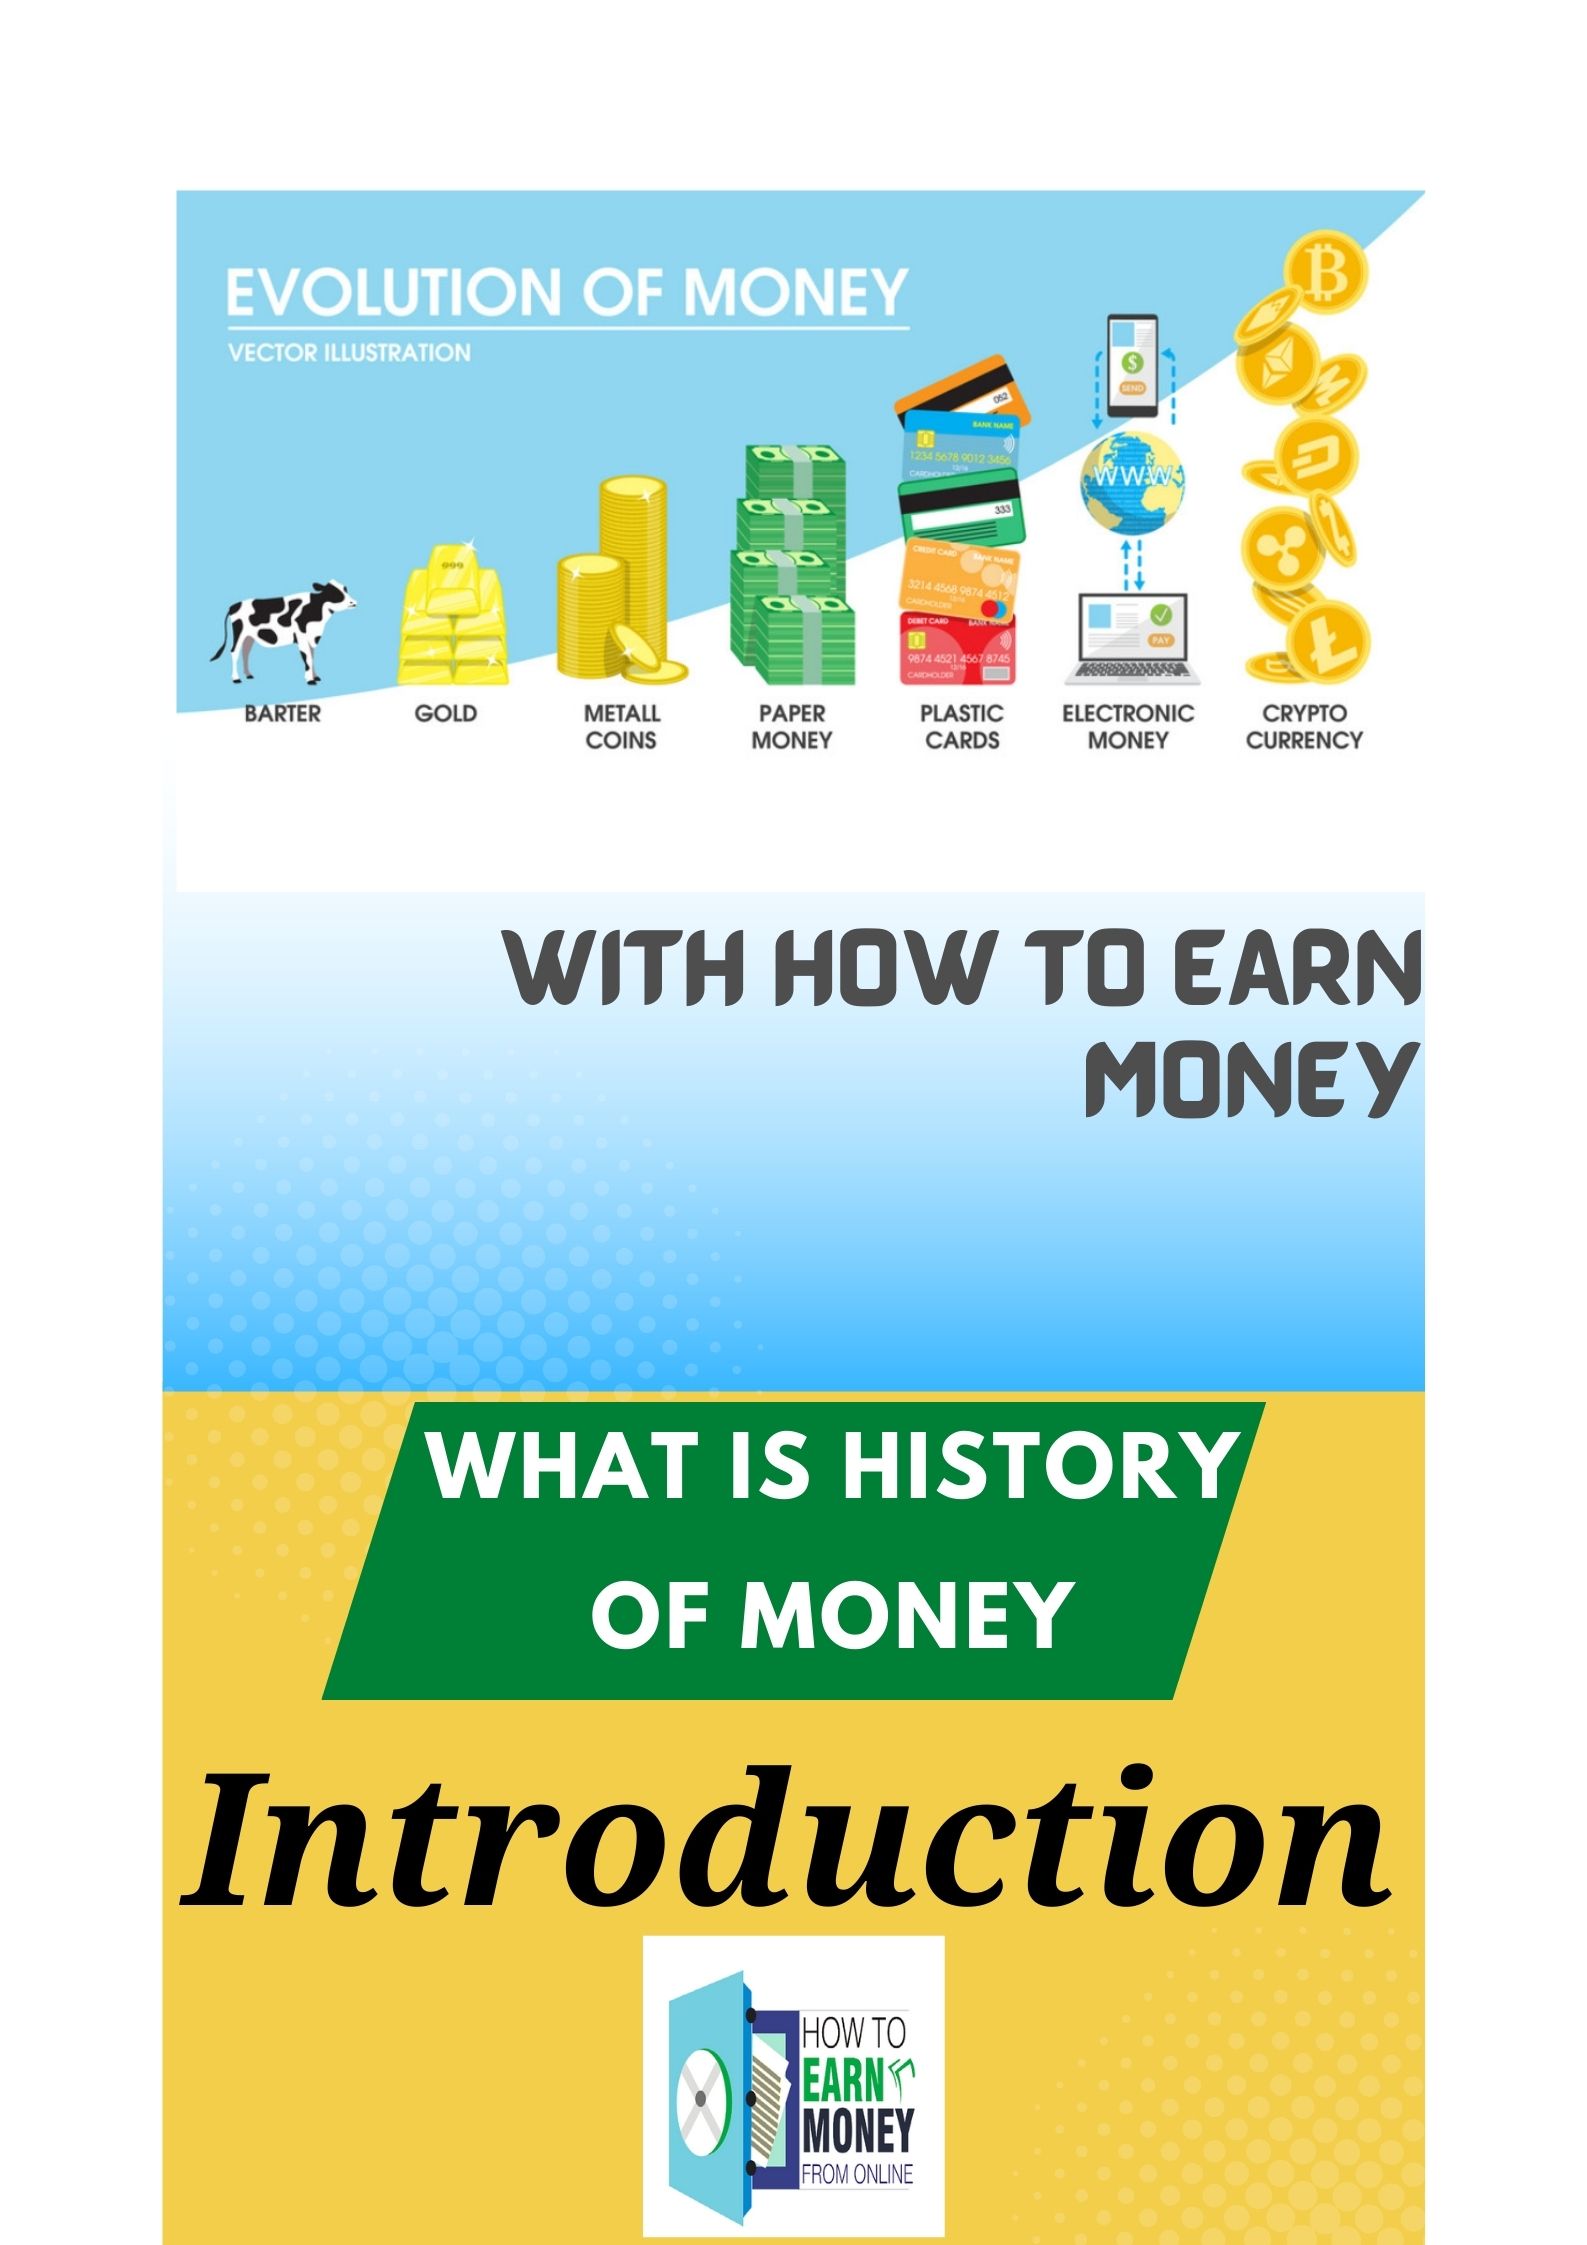 Introduction (What is history of money)